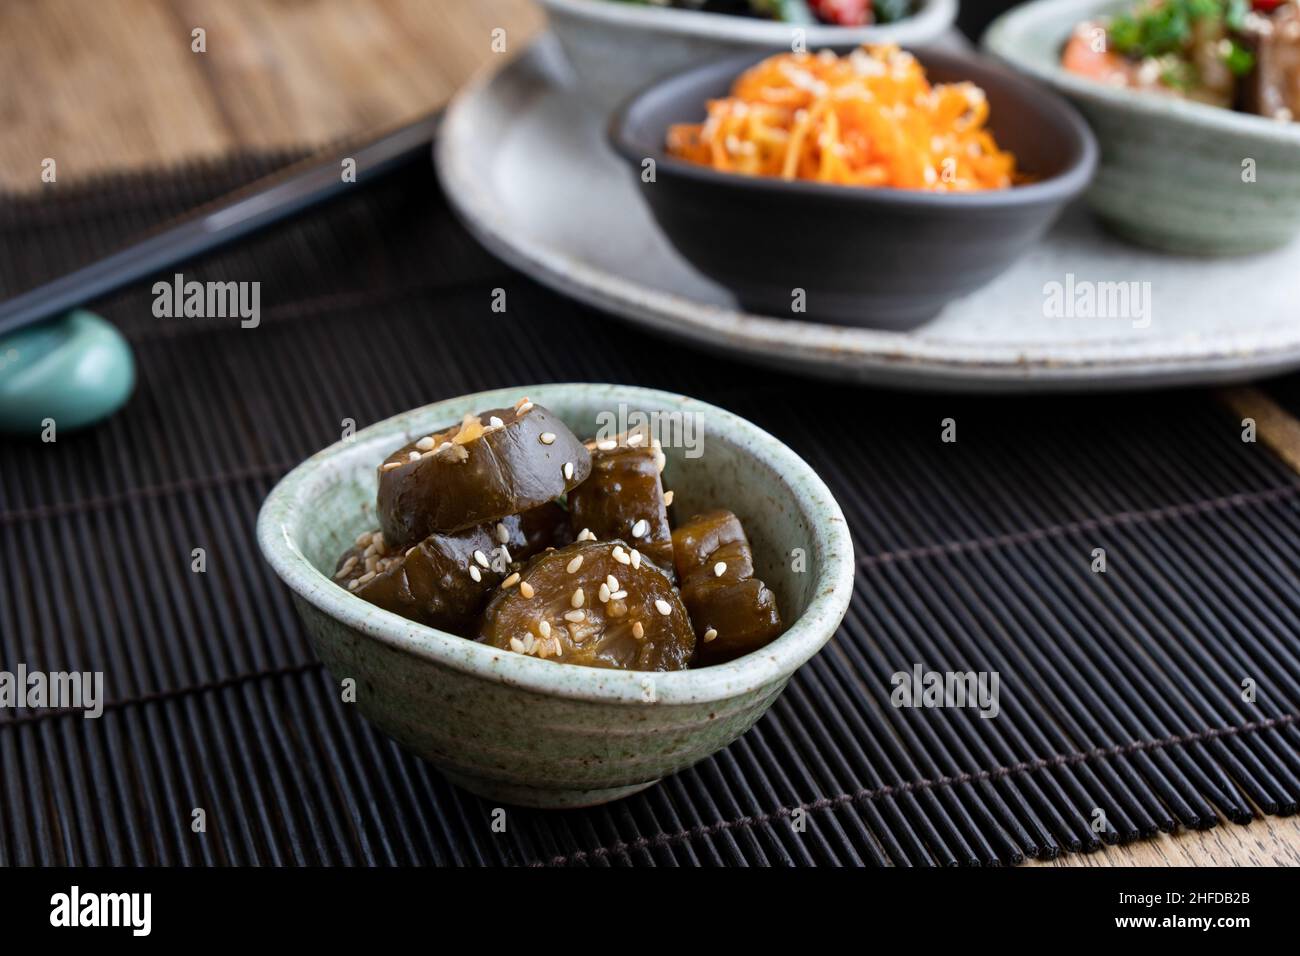 Japanese pickled cucumber salad with sesame seeds. Bamboo mat and chopsitcks in background. Stock Photo